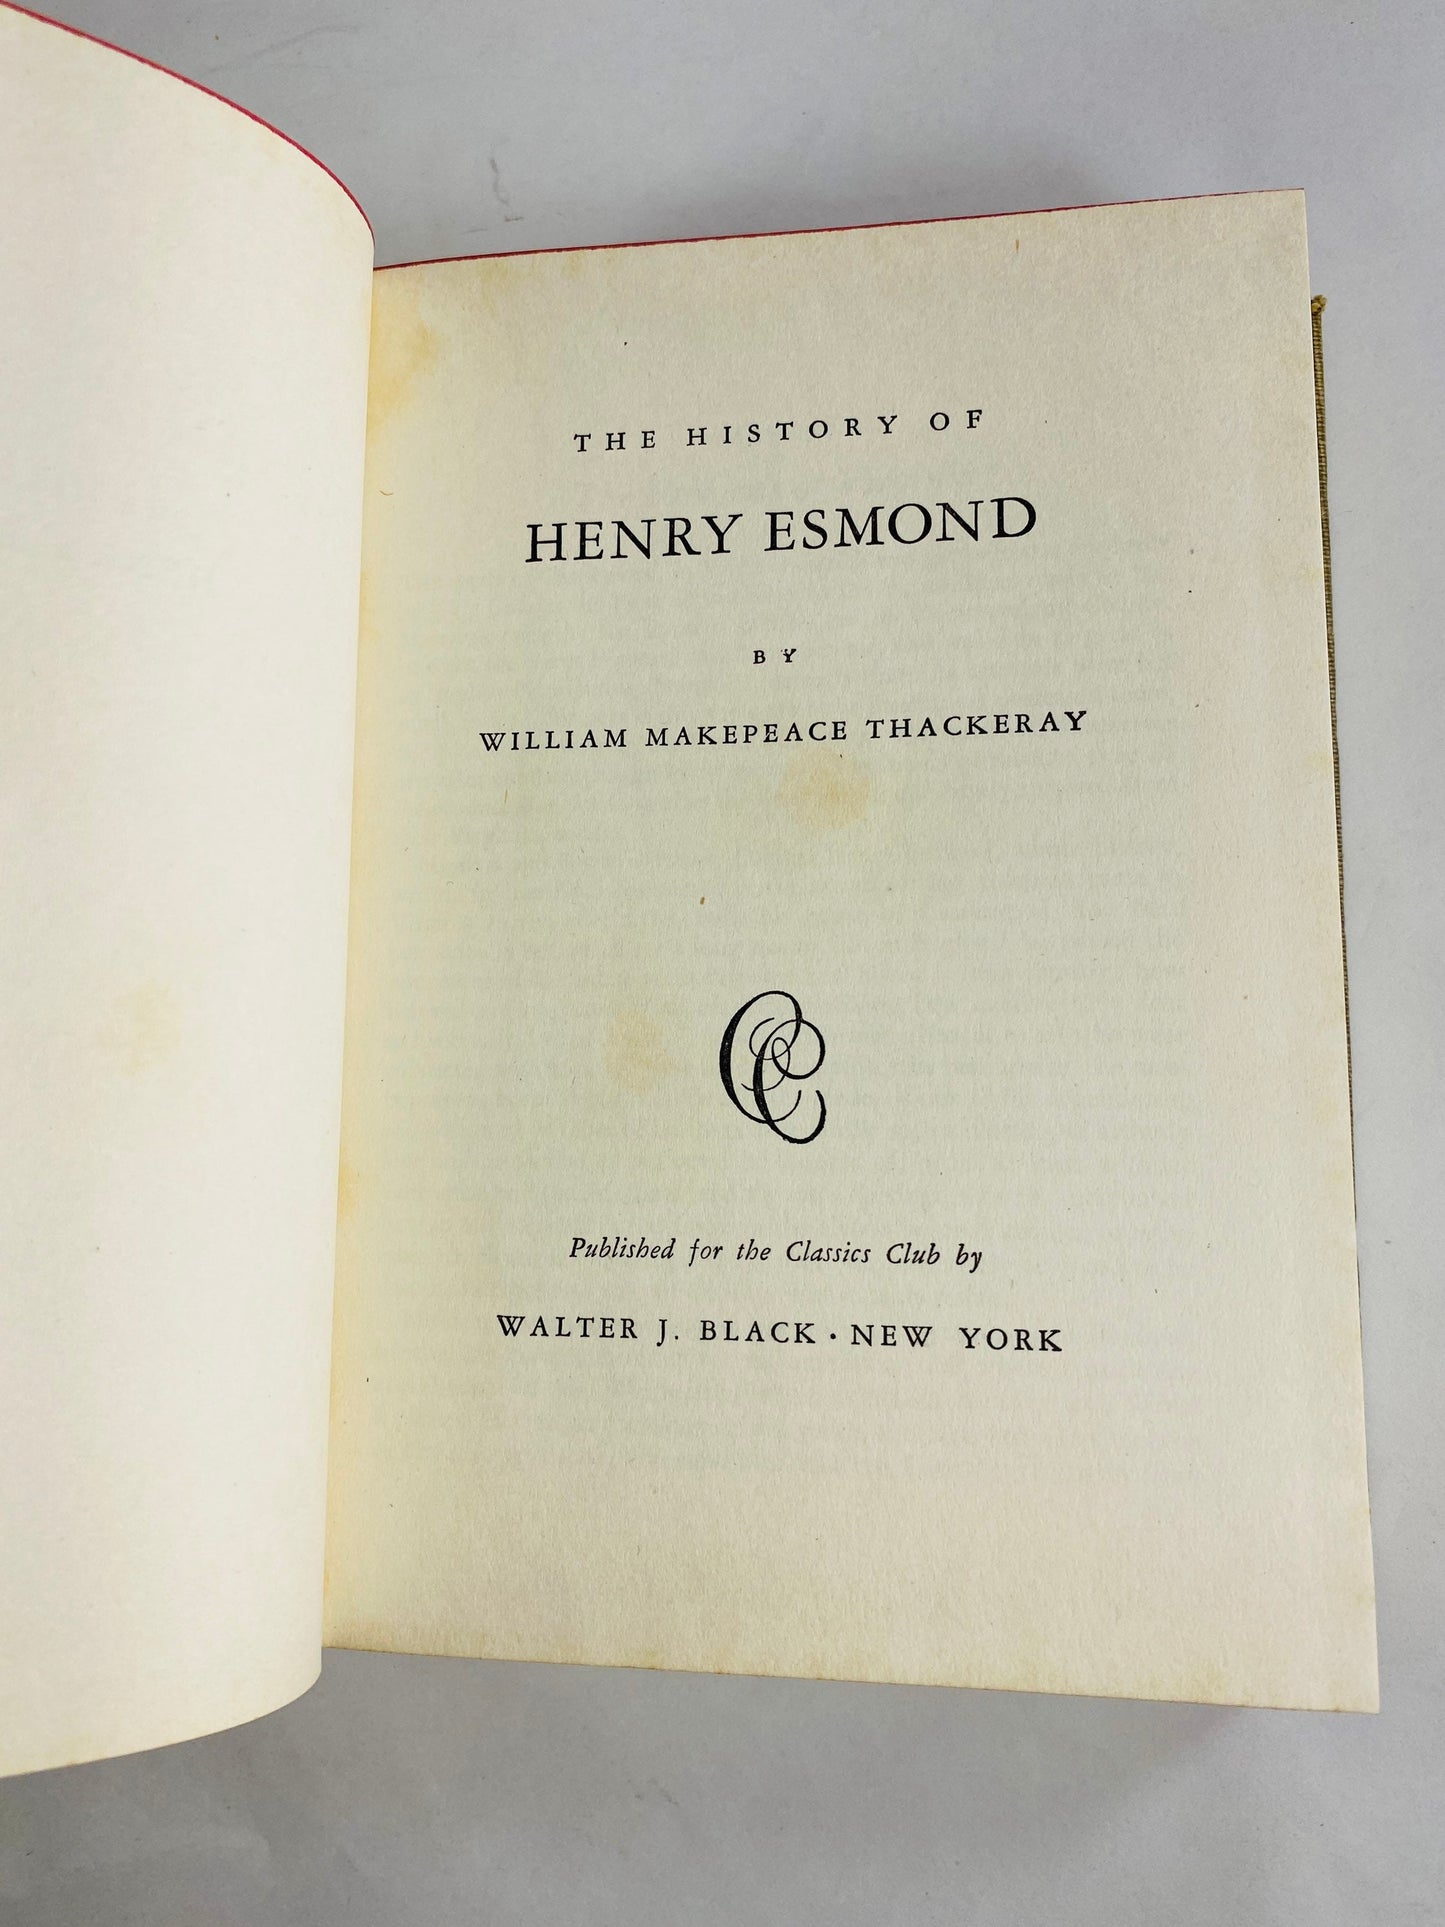 1942 History of Henry Esmond Beautiful beige cloth vintage book about a young man making his way in the corrupt world. Thackeray